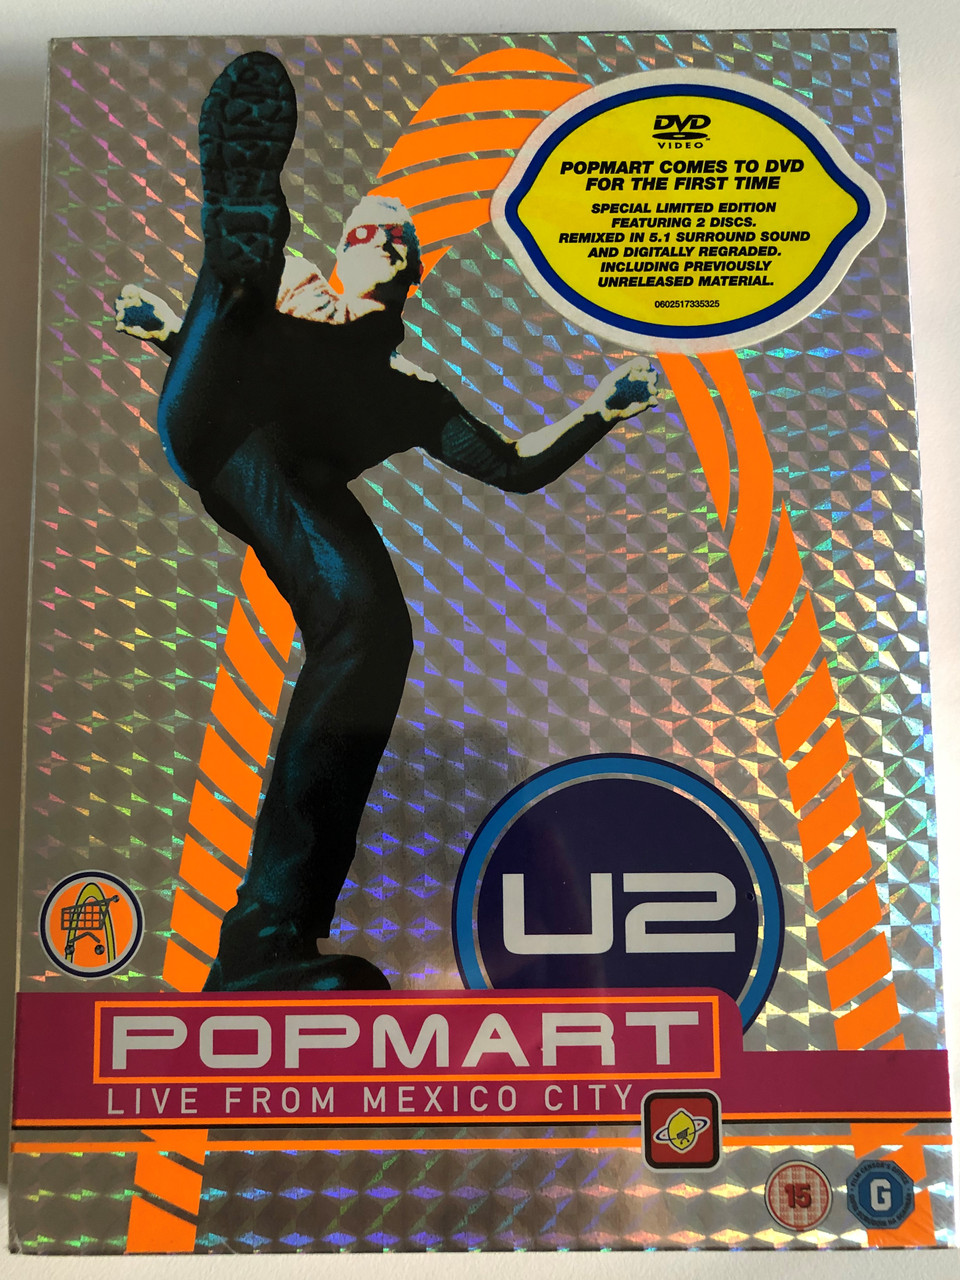 U2 Album: Popmart: Live from Mexico City / Special Limited Edition / 2 DVDs  - bibleinmylanguage